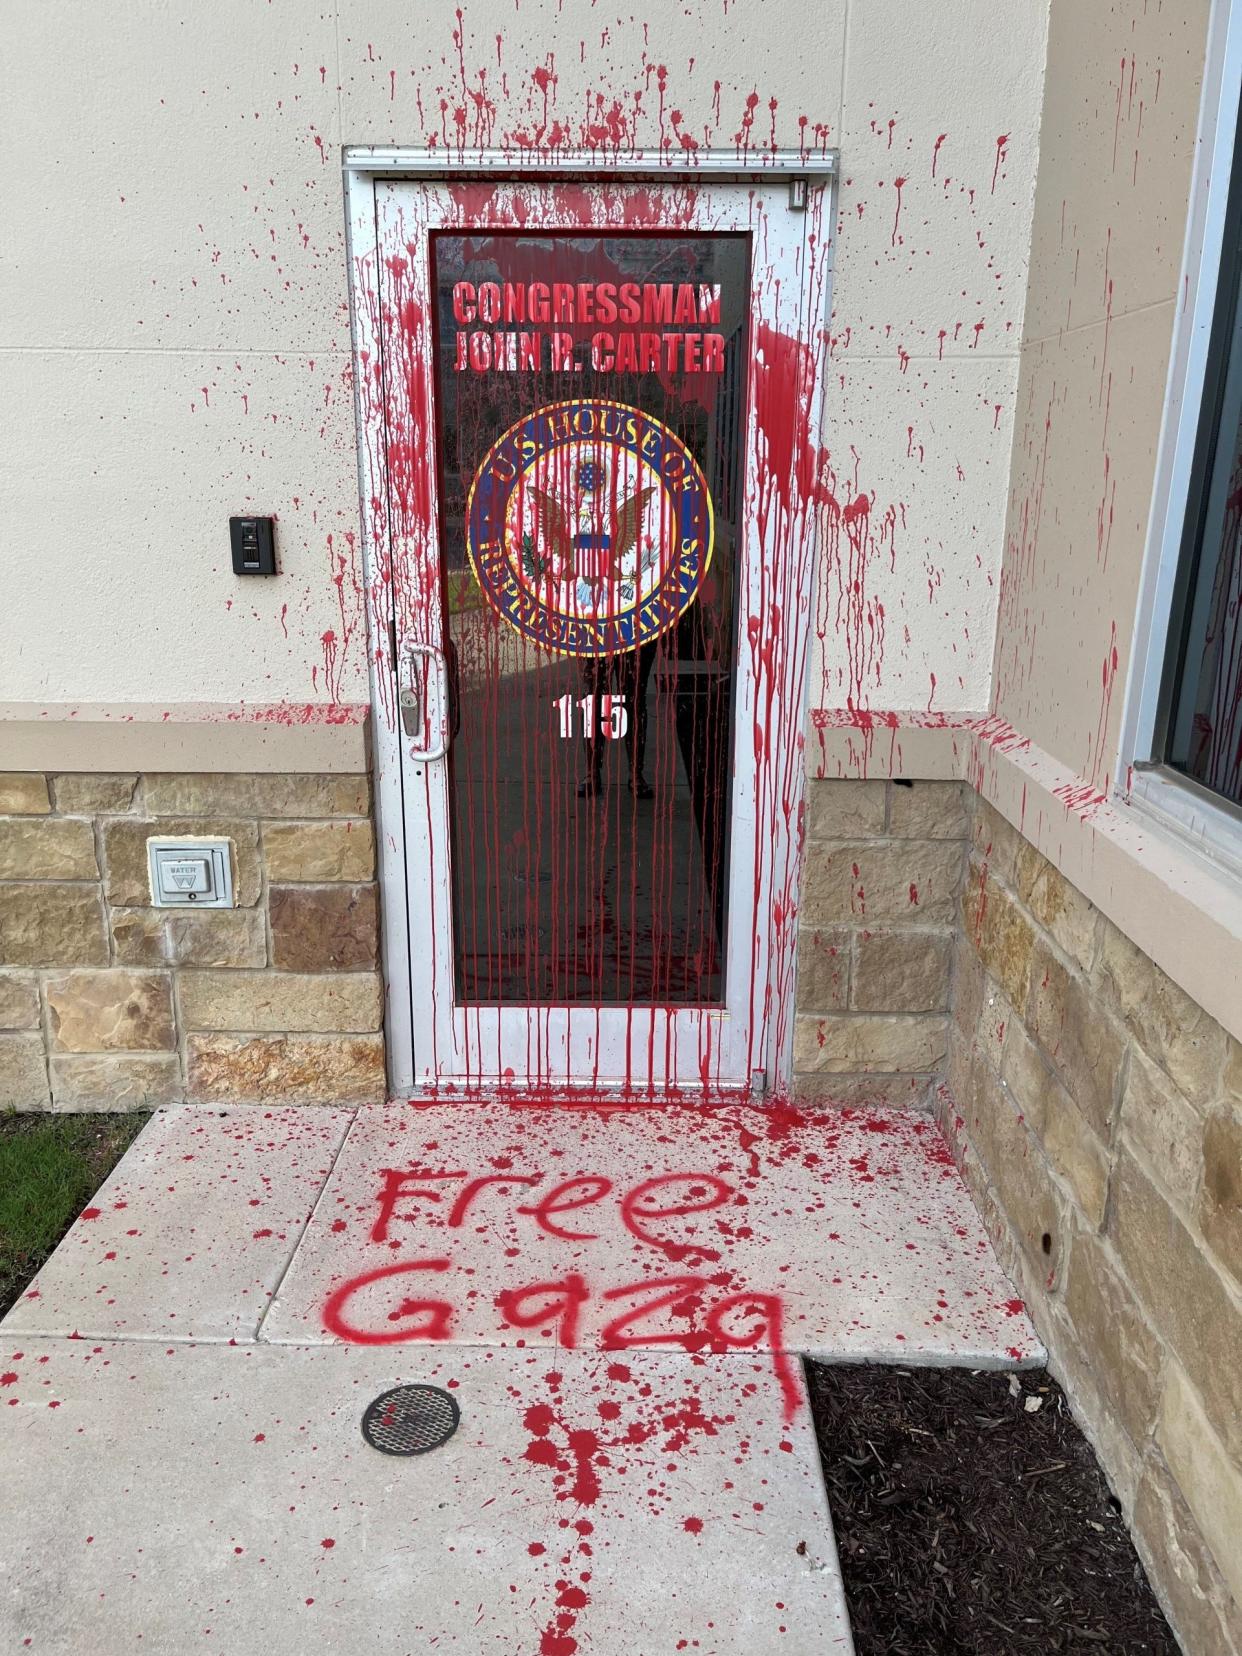 Police are looking for the person who threw red paint on the door and spray-painted "Free Gaza" outside the Georgetown office of U.S. Rep. John Carter, R-Round Rock.